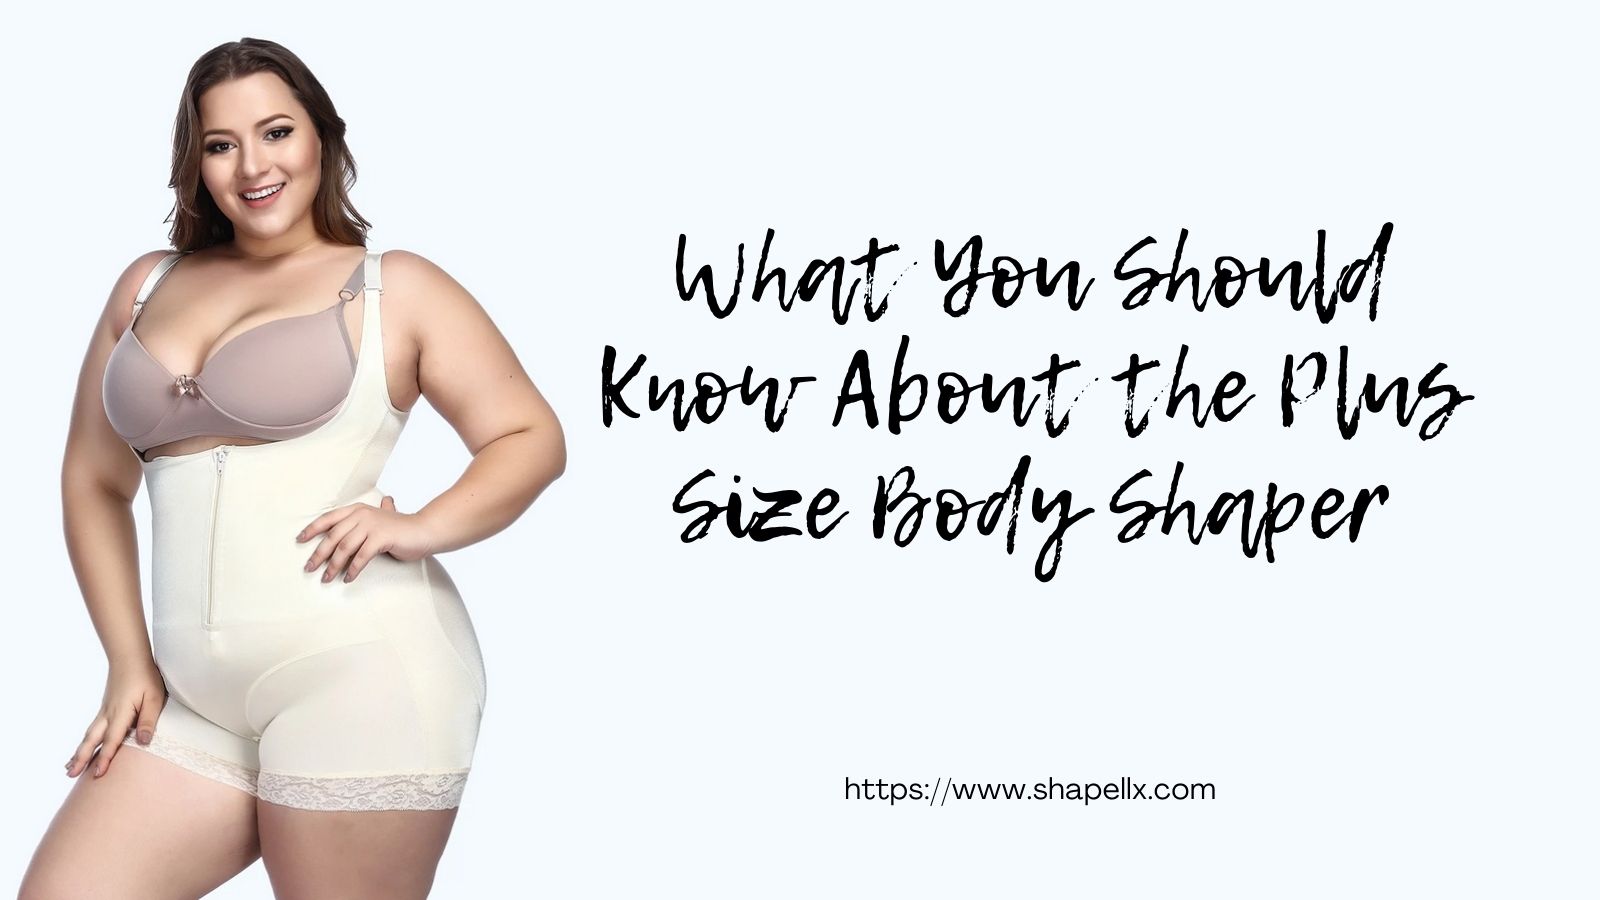 What You Should Know About the Plus Size Body Shaper